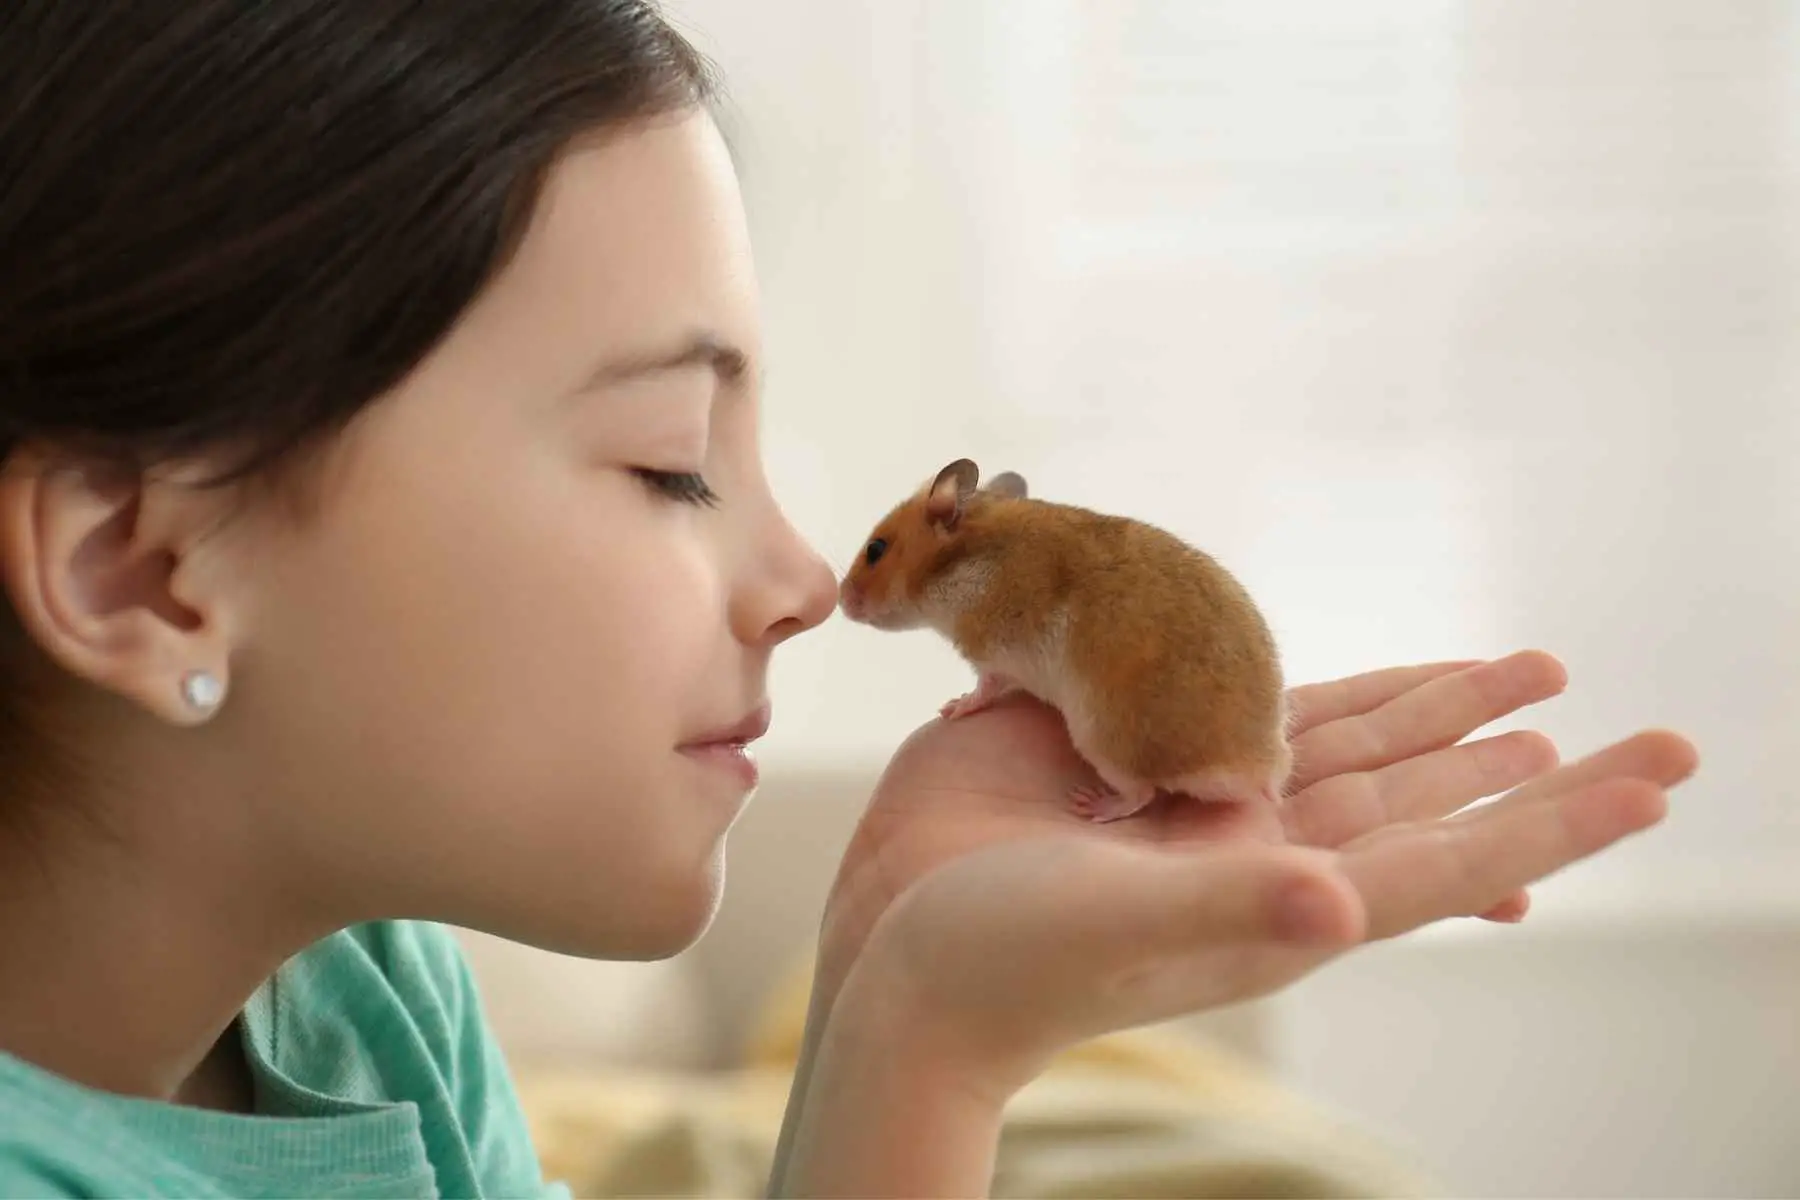 Girl holding a hamster in her hand and sniffing on it